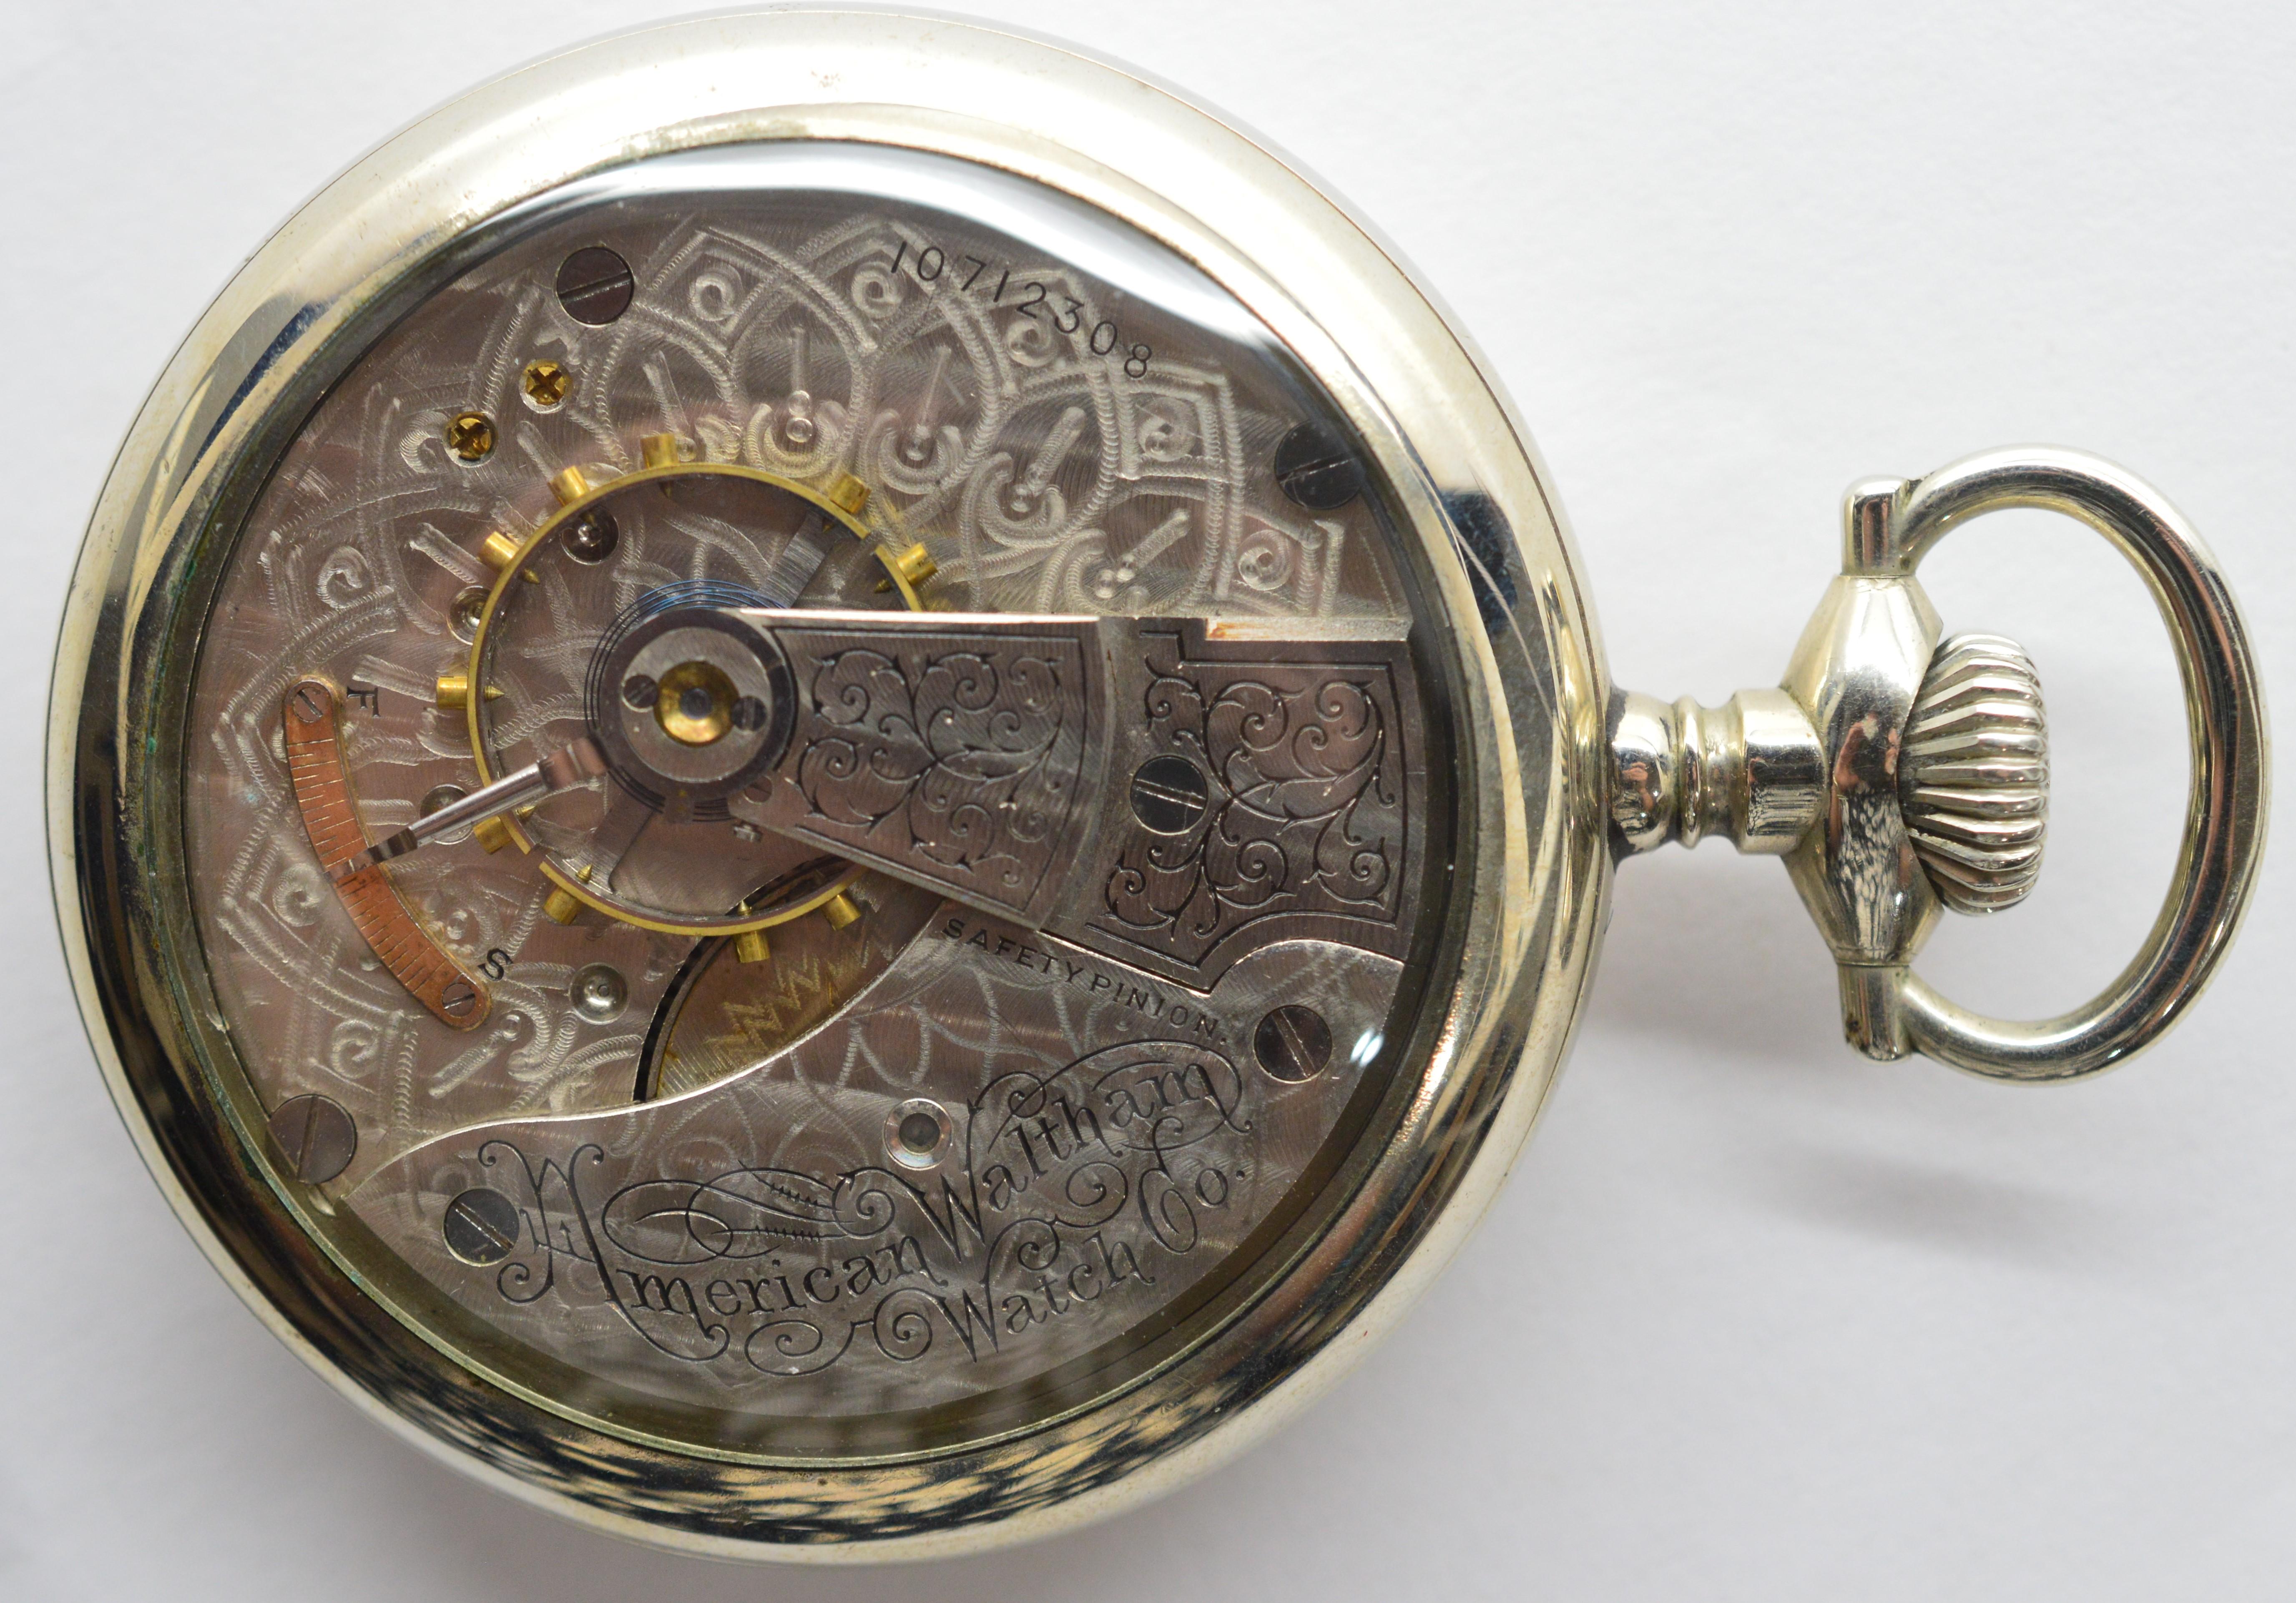 Enjoy seeing the unmatched craftsmanship in this American Waltham Watch Company Steel Pocket Watch expertly restored with a unique display back allowing the intricate parts of this time piece to be viewed. Number 0712308, circa 1901, seven jeweled